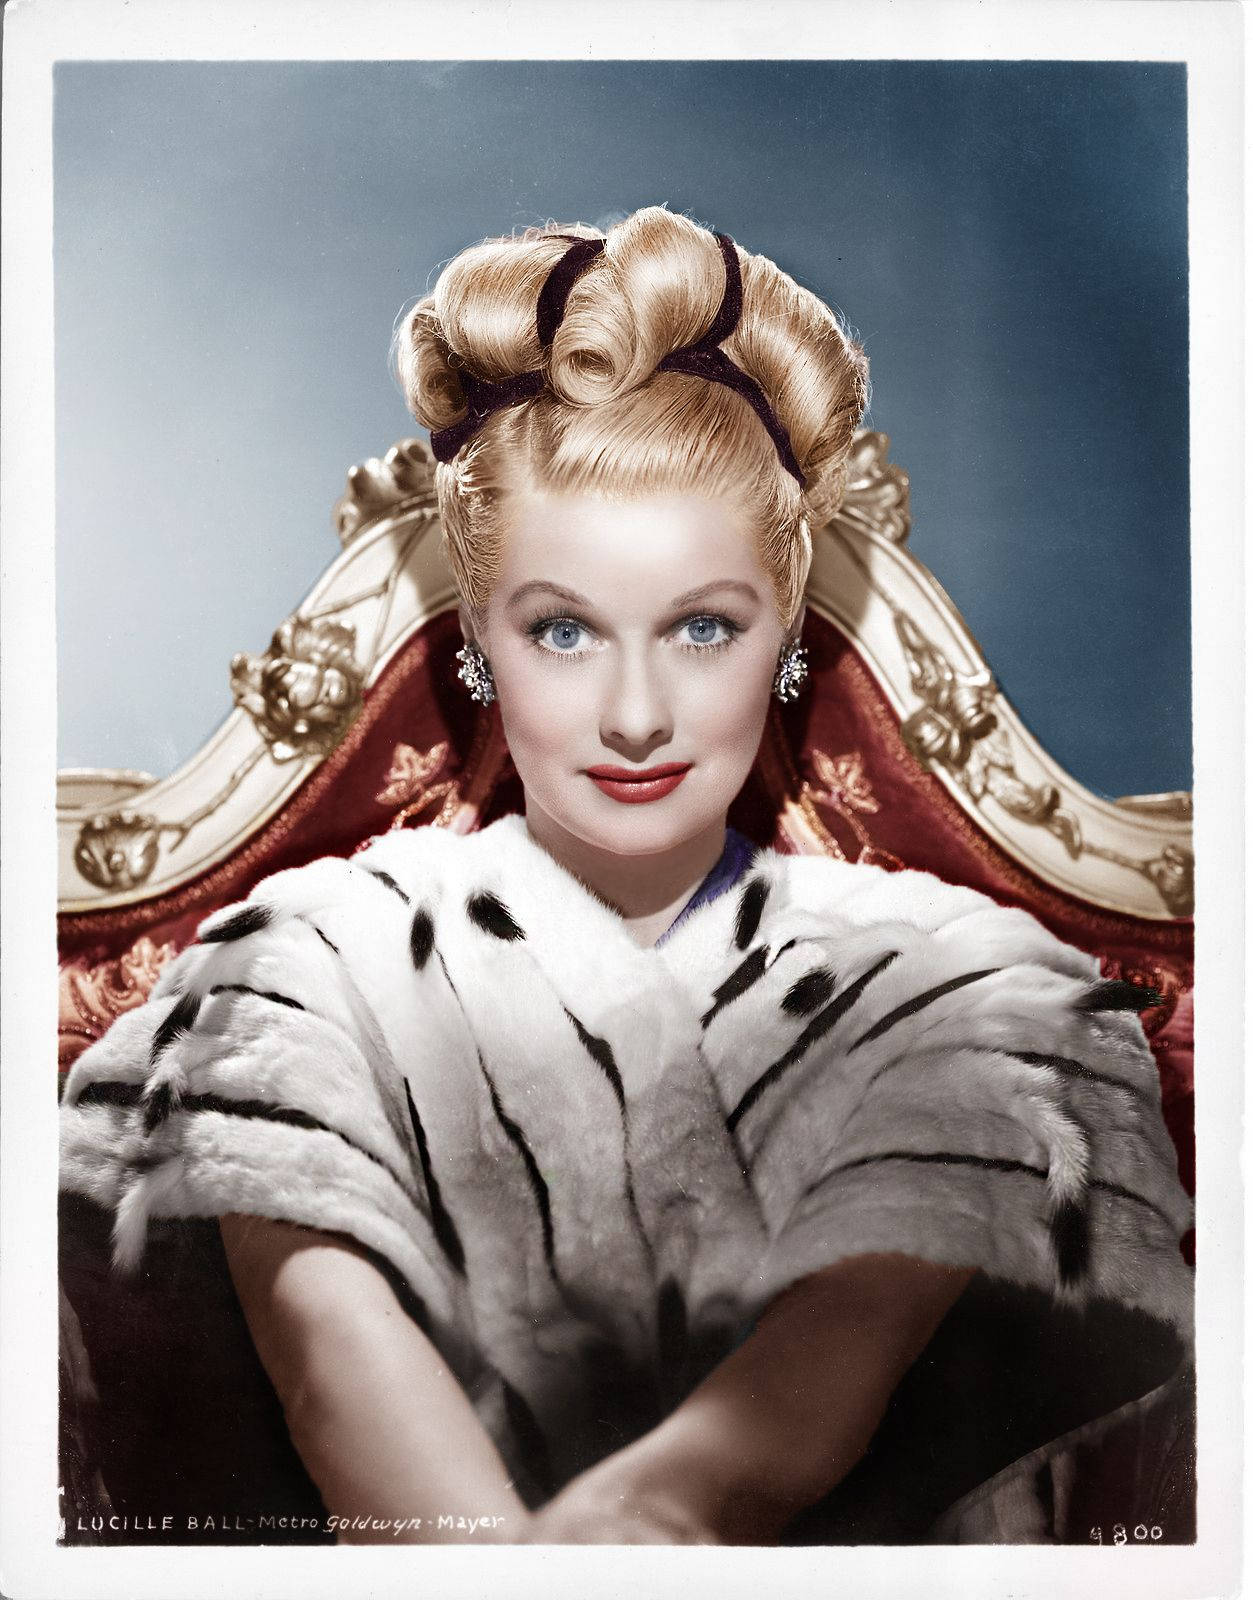 Caption: Lucille Ball Elegantly Sitting on a Red Chair Wallpaper